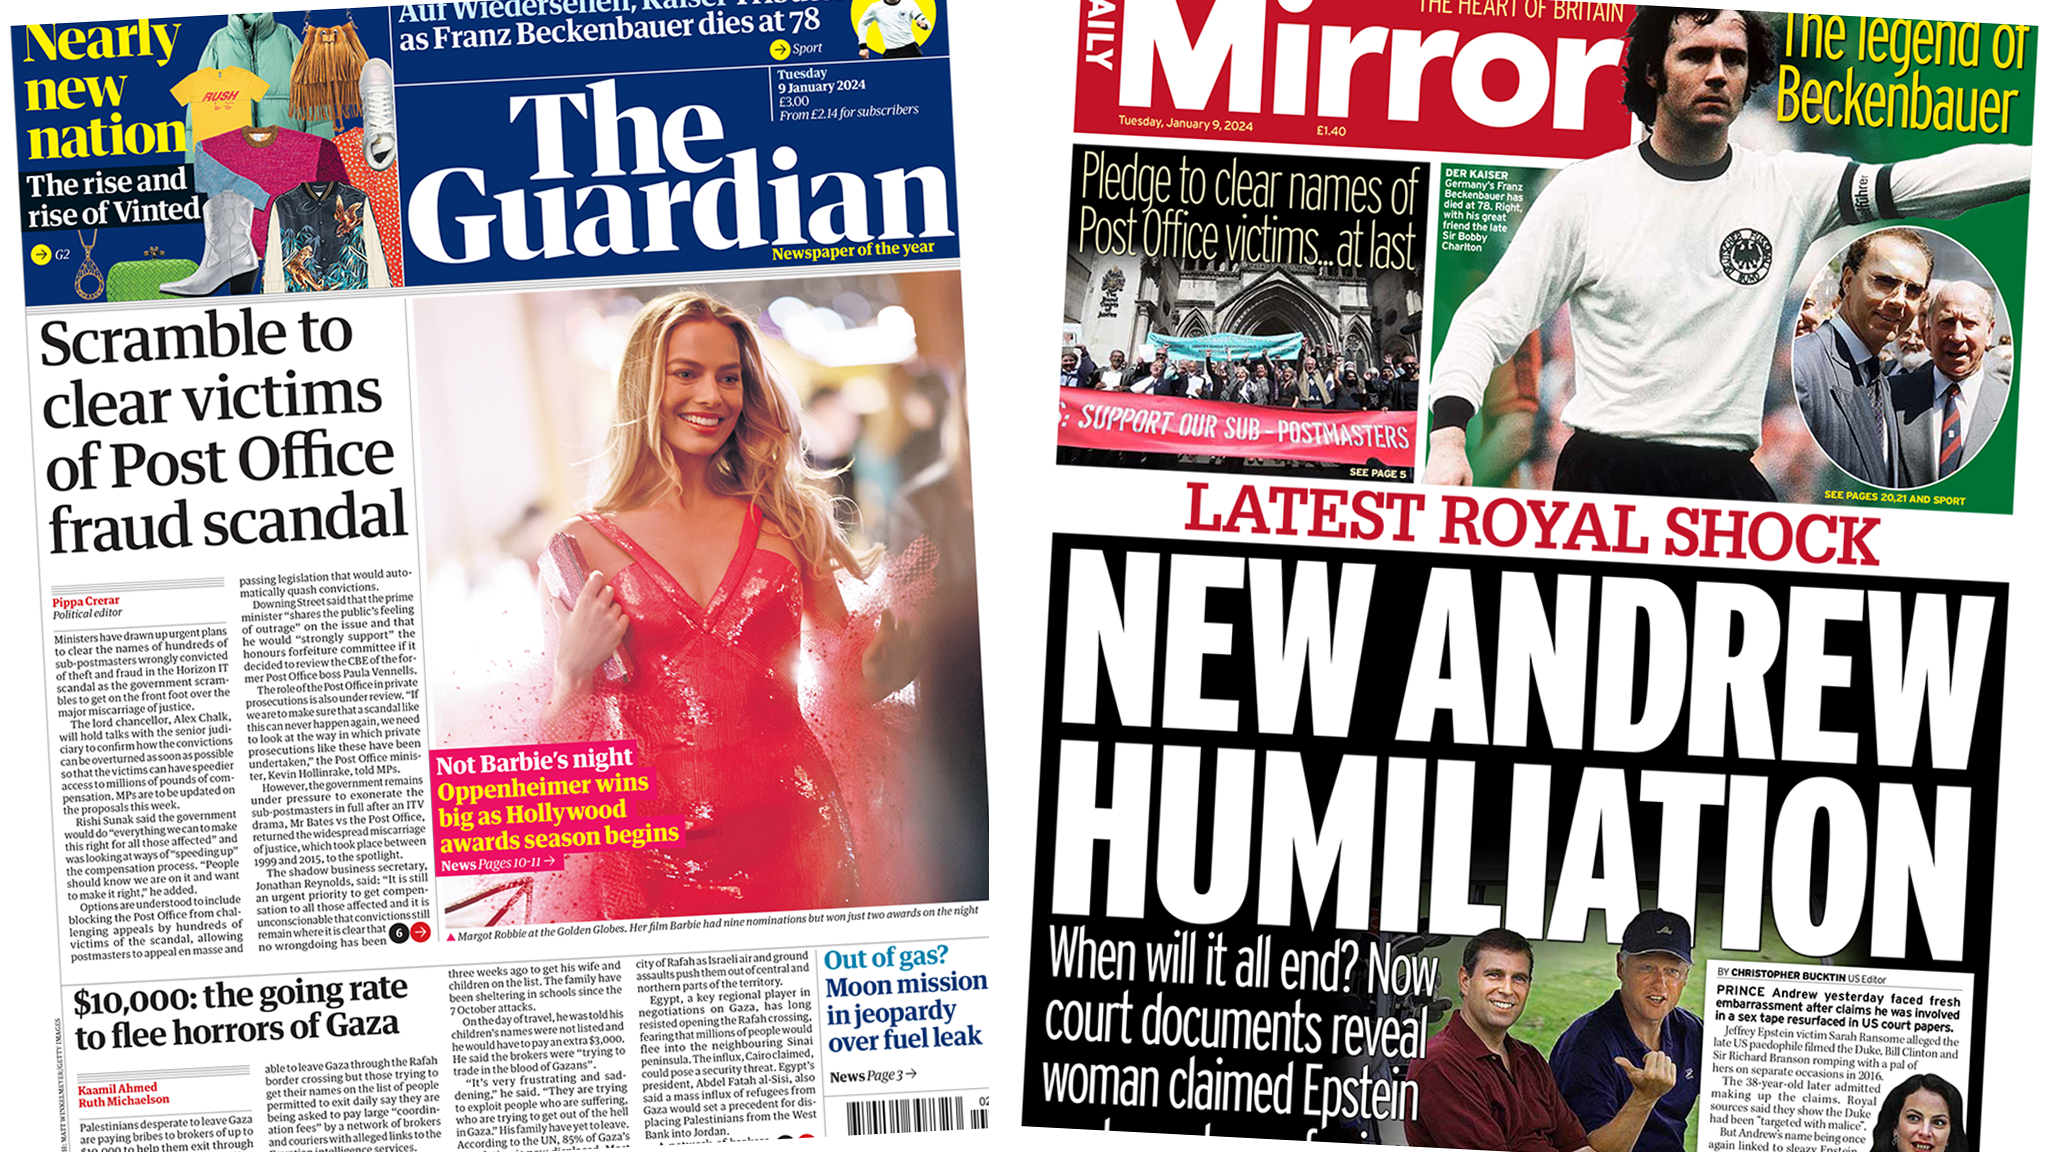 The headline in the Guardian reads, "Scramble to clear victims of Post Office fraud scandal", while the headline in the Mirror reads, "Latest royal shock: New Andrew humiliation".